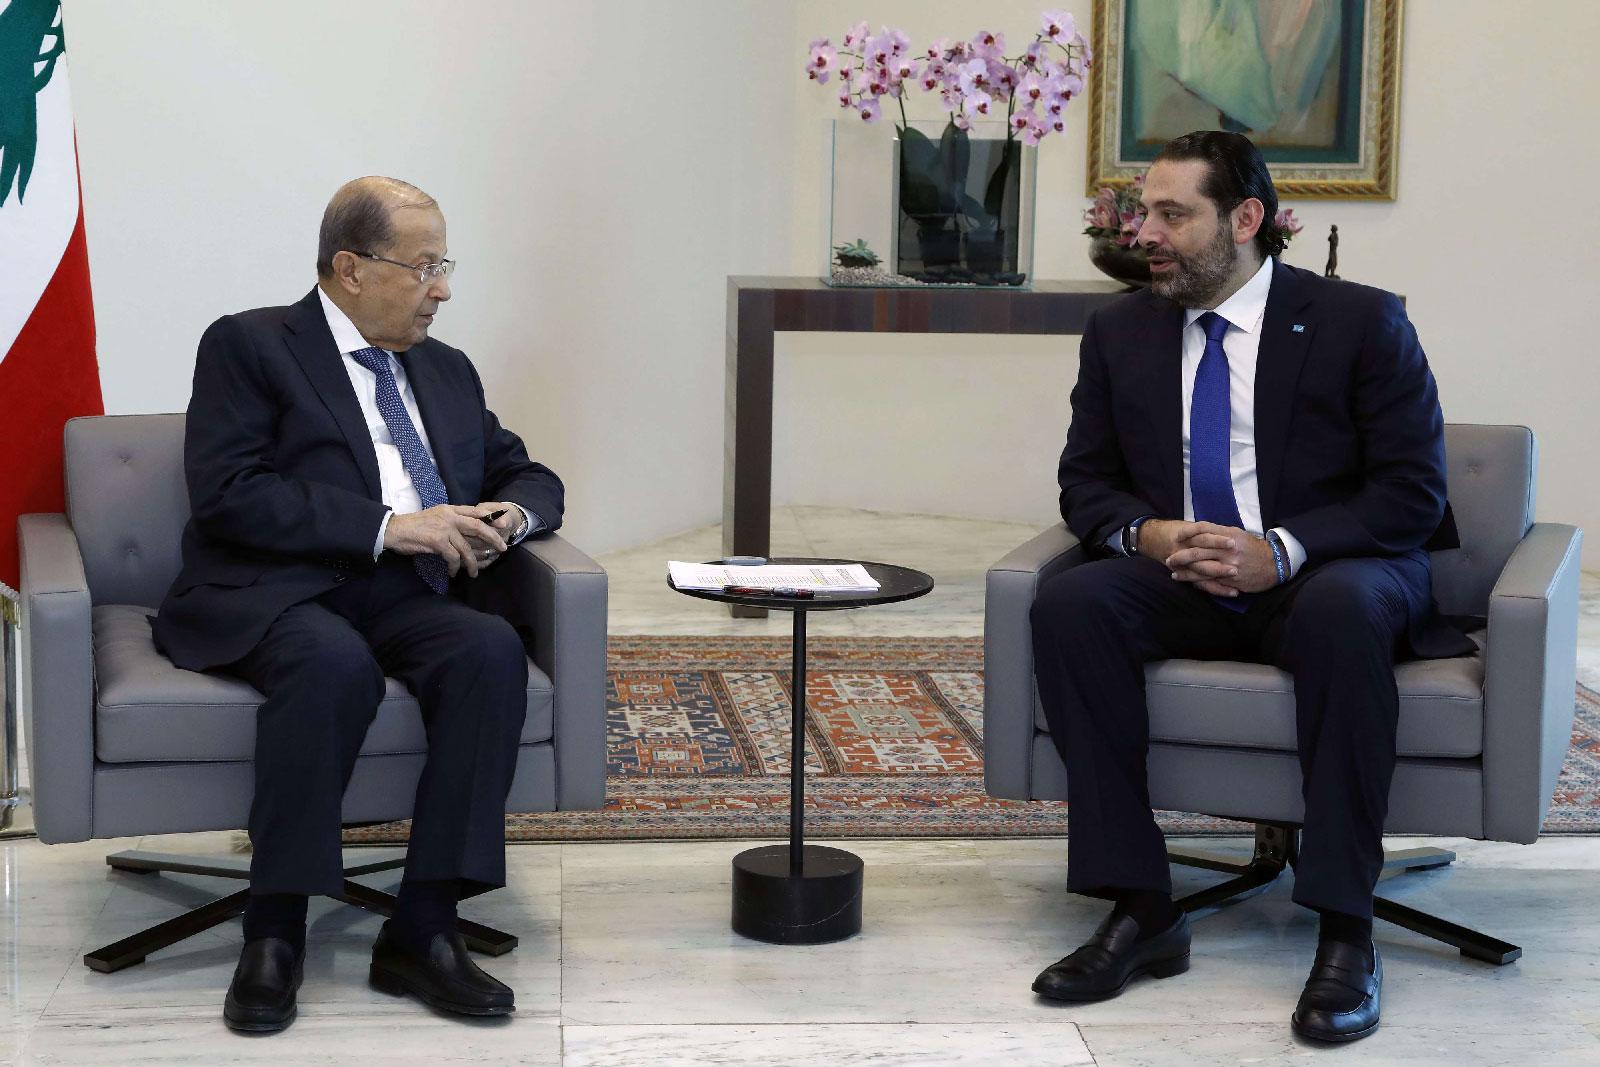 Lebanese President Michel Aoun, left, meets with Prime Minister Saad Hariri, at the Presidential Palace in Baabda.